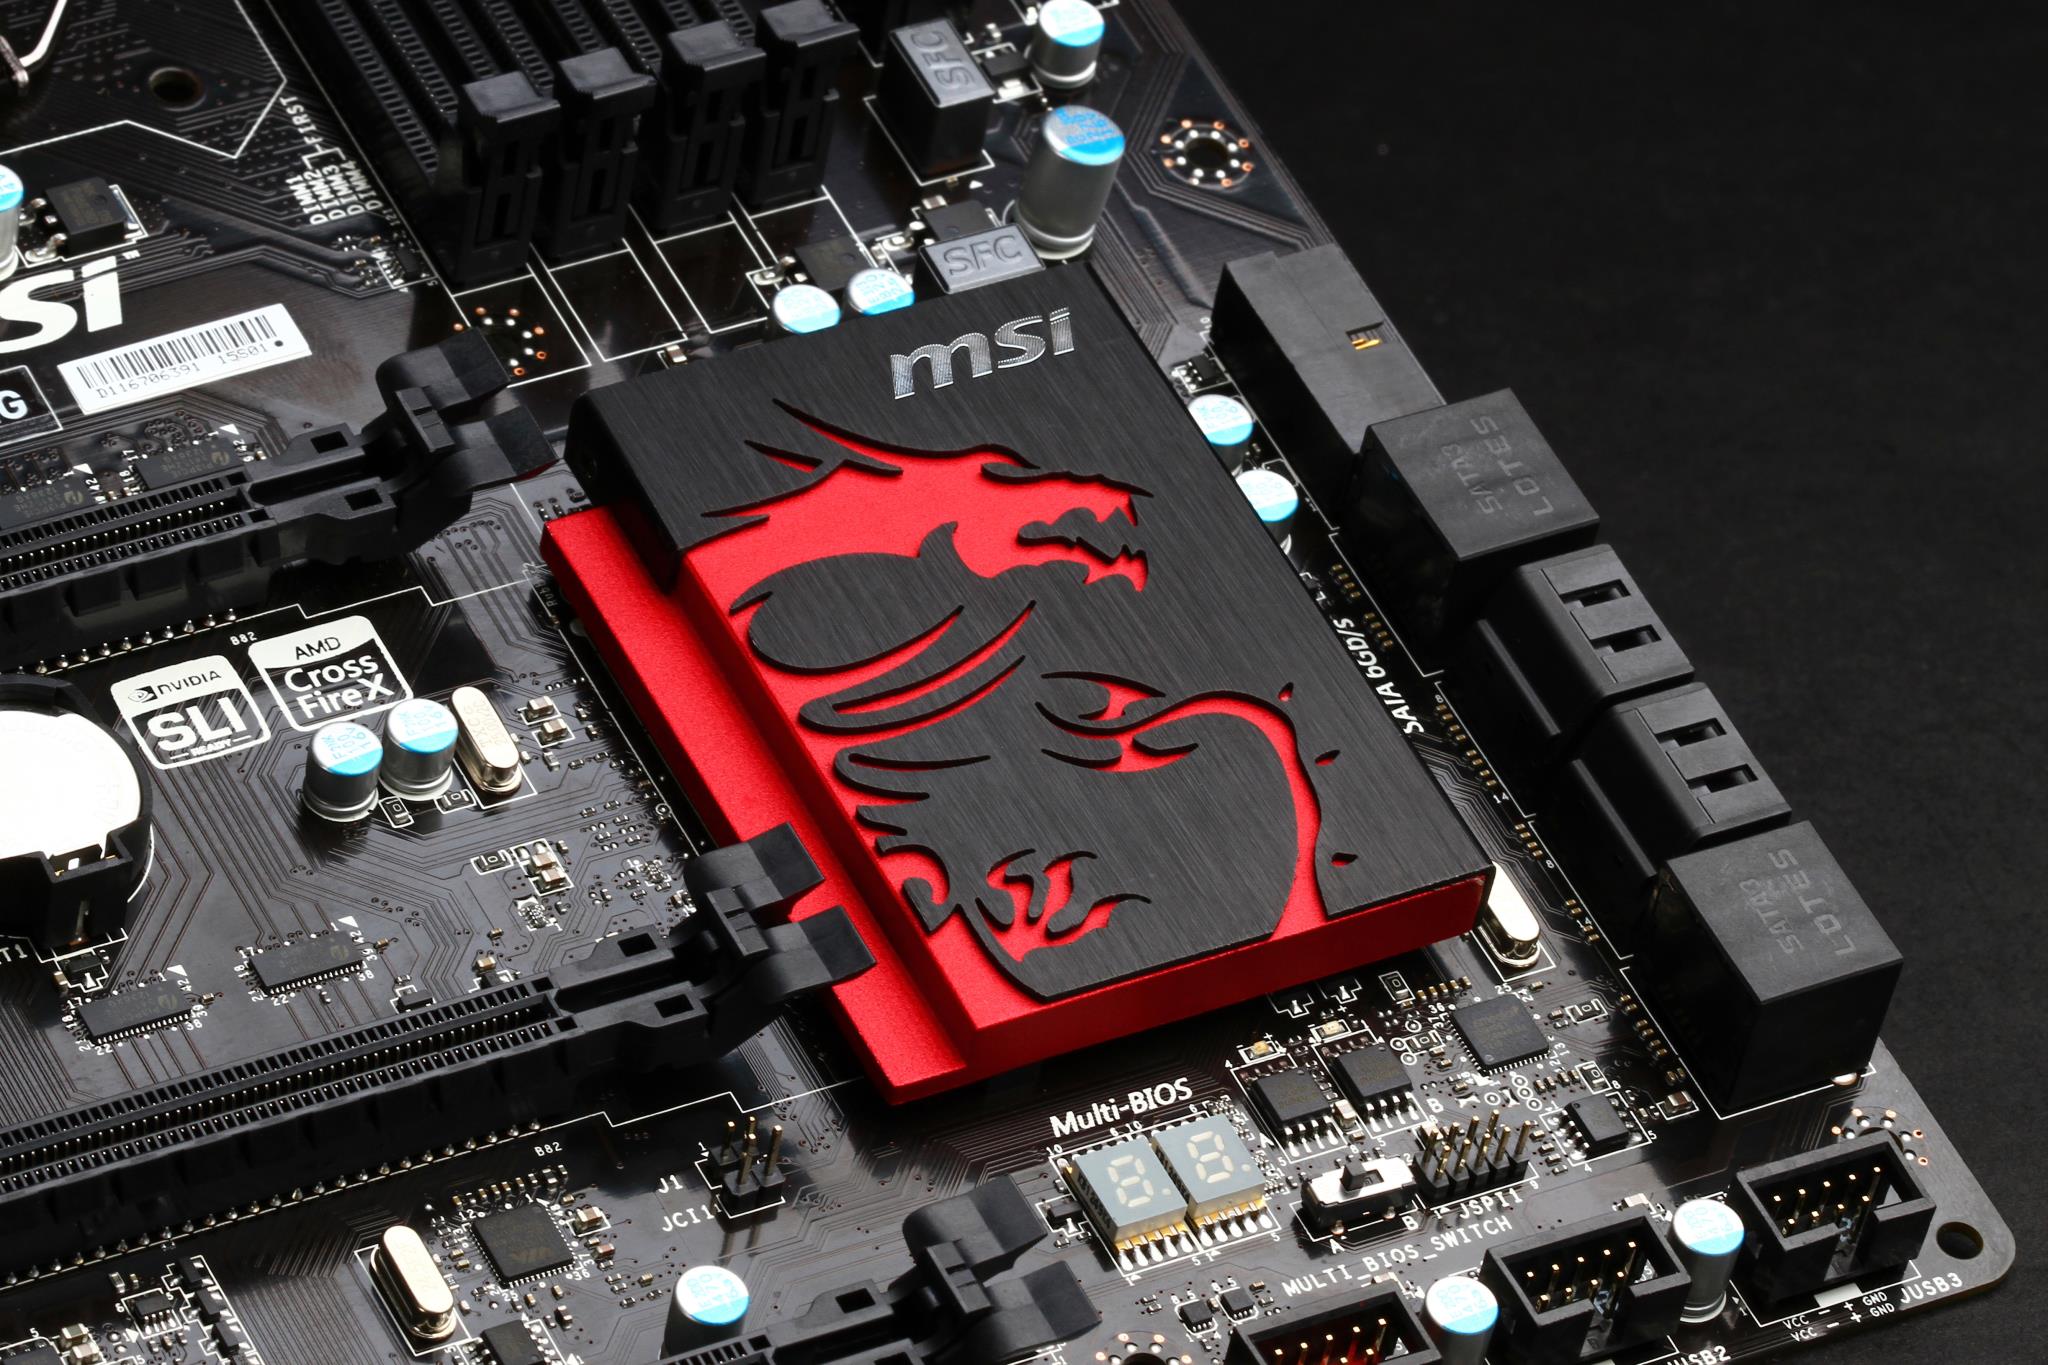 Msi Z77a Gd65 Gaming Motherboard Unveiled Packed With